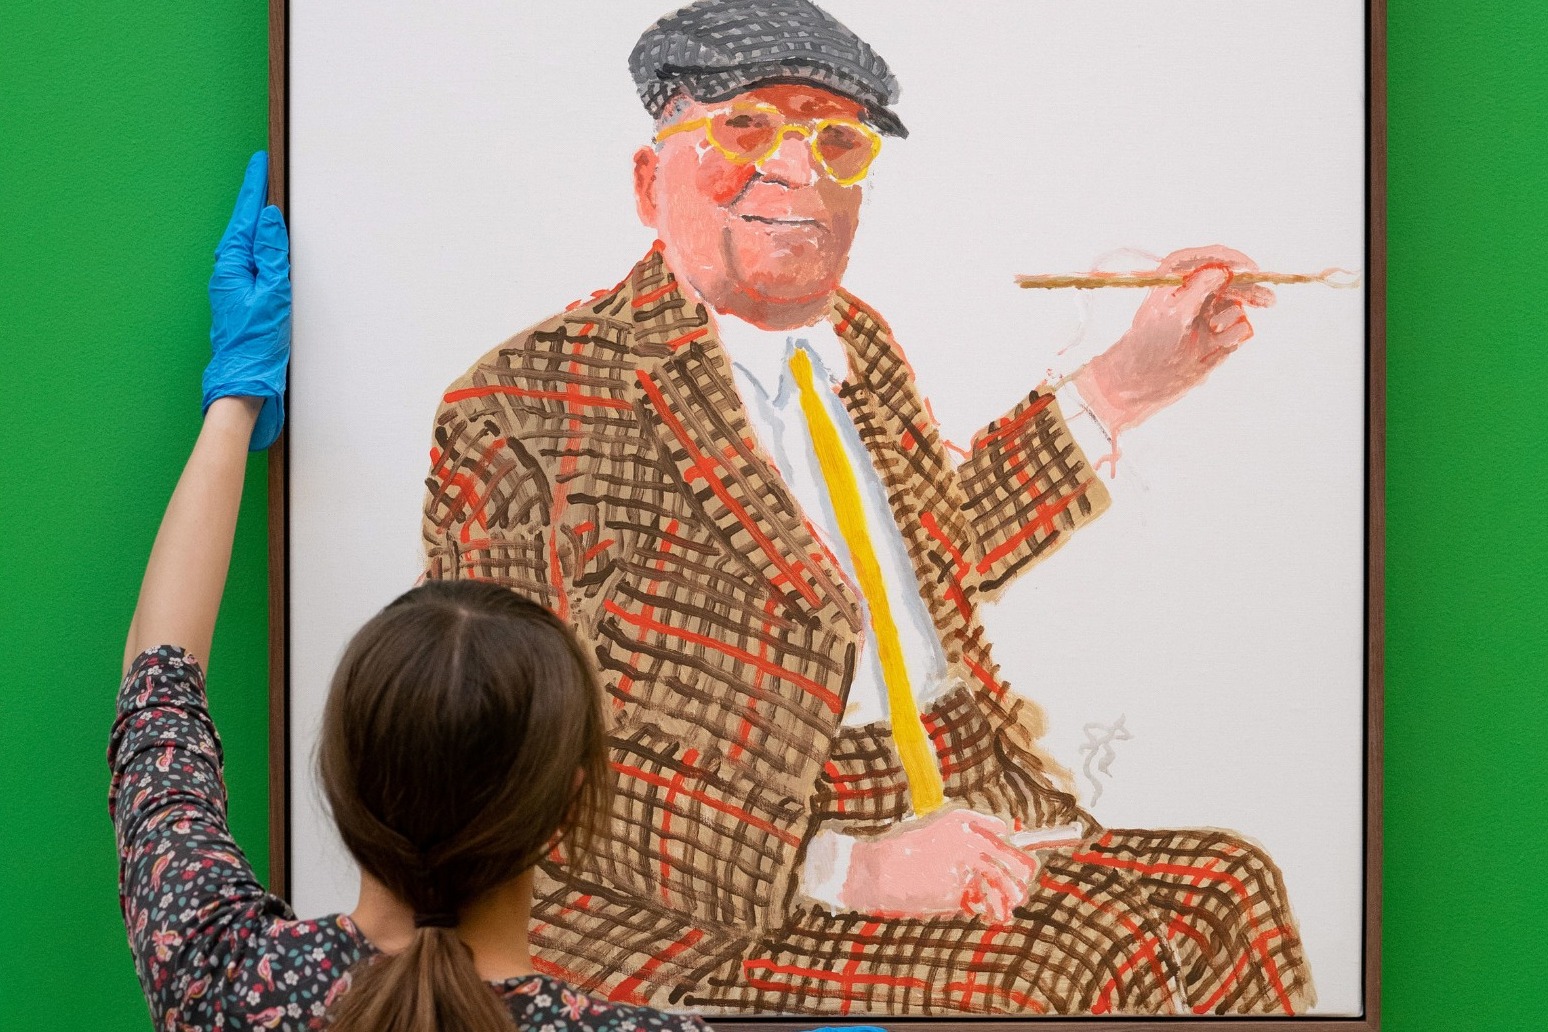 Works by David Hockney and Rankin to be sold in anonymous auction for WaterAid 